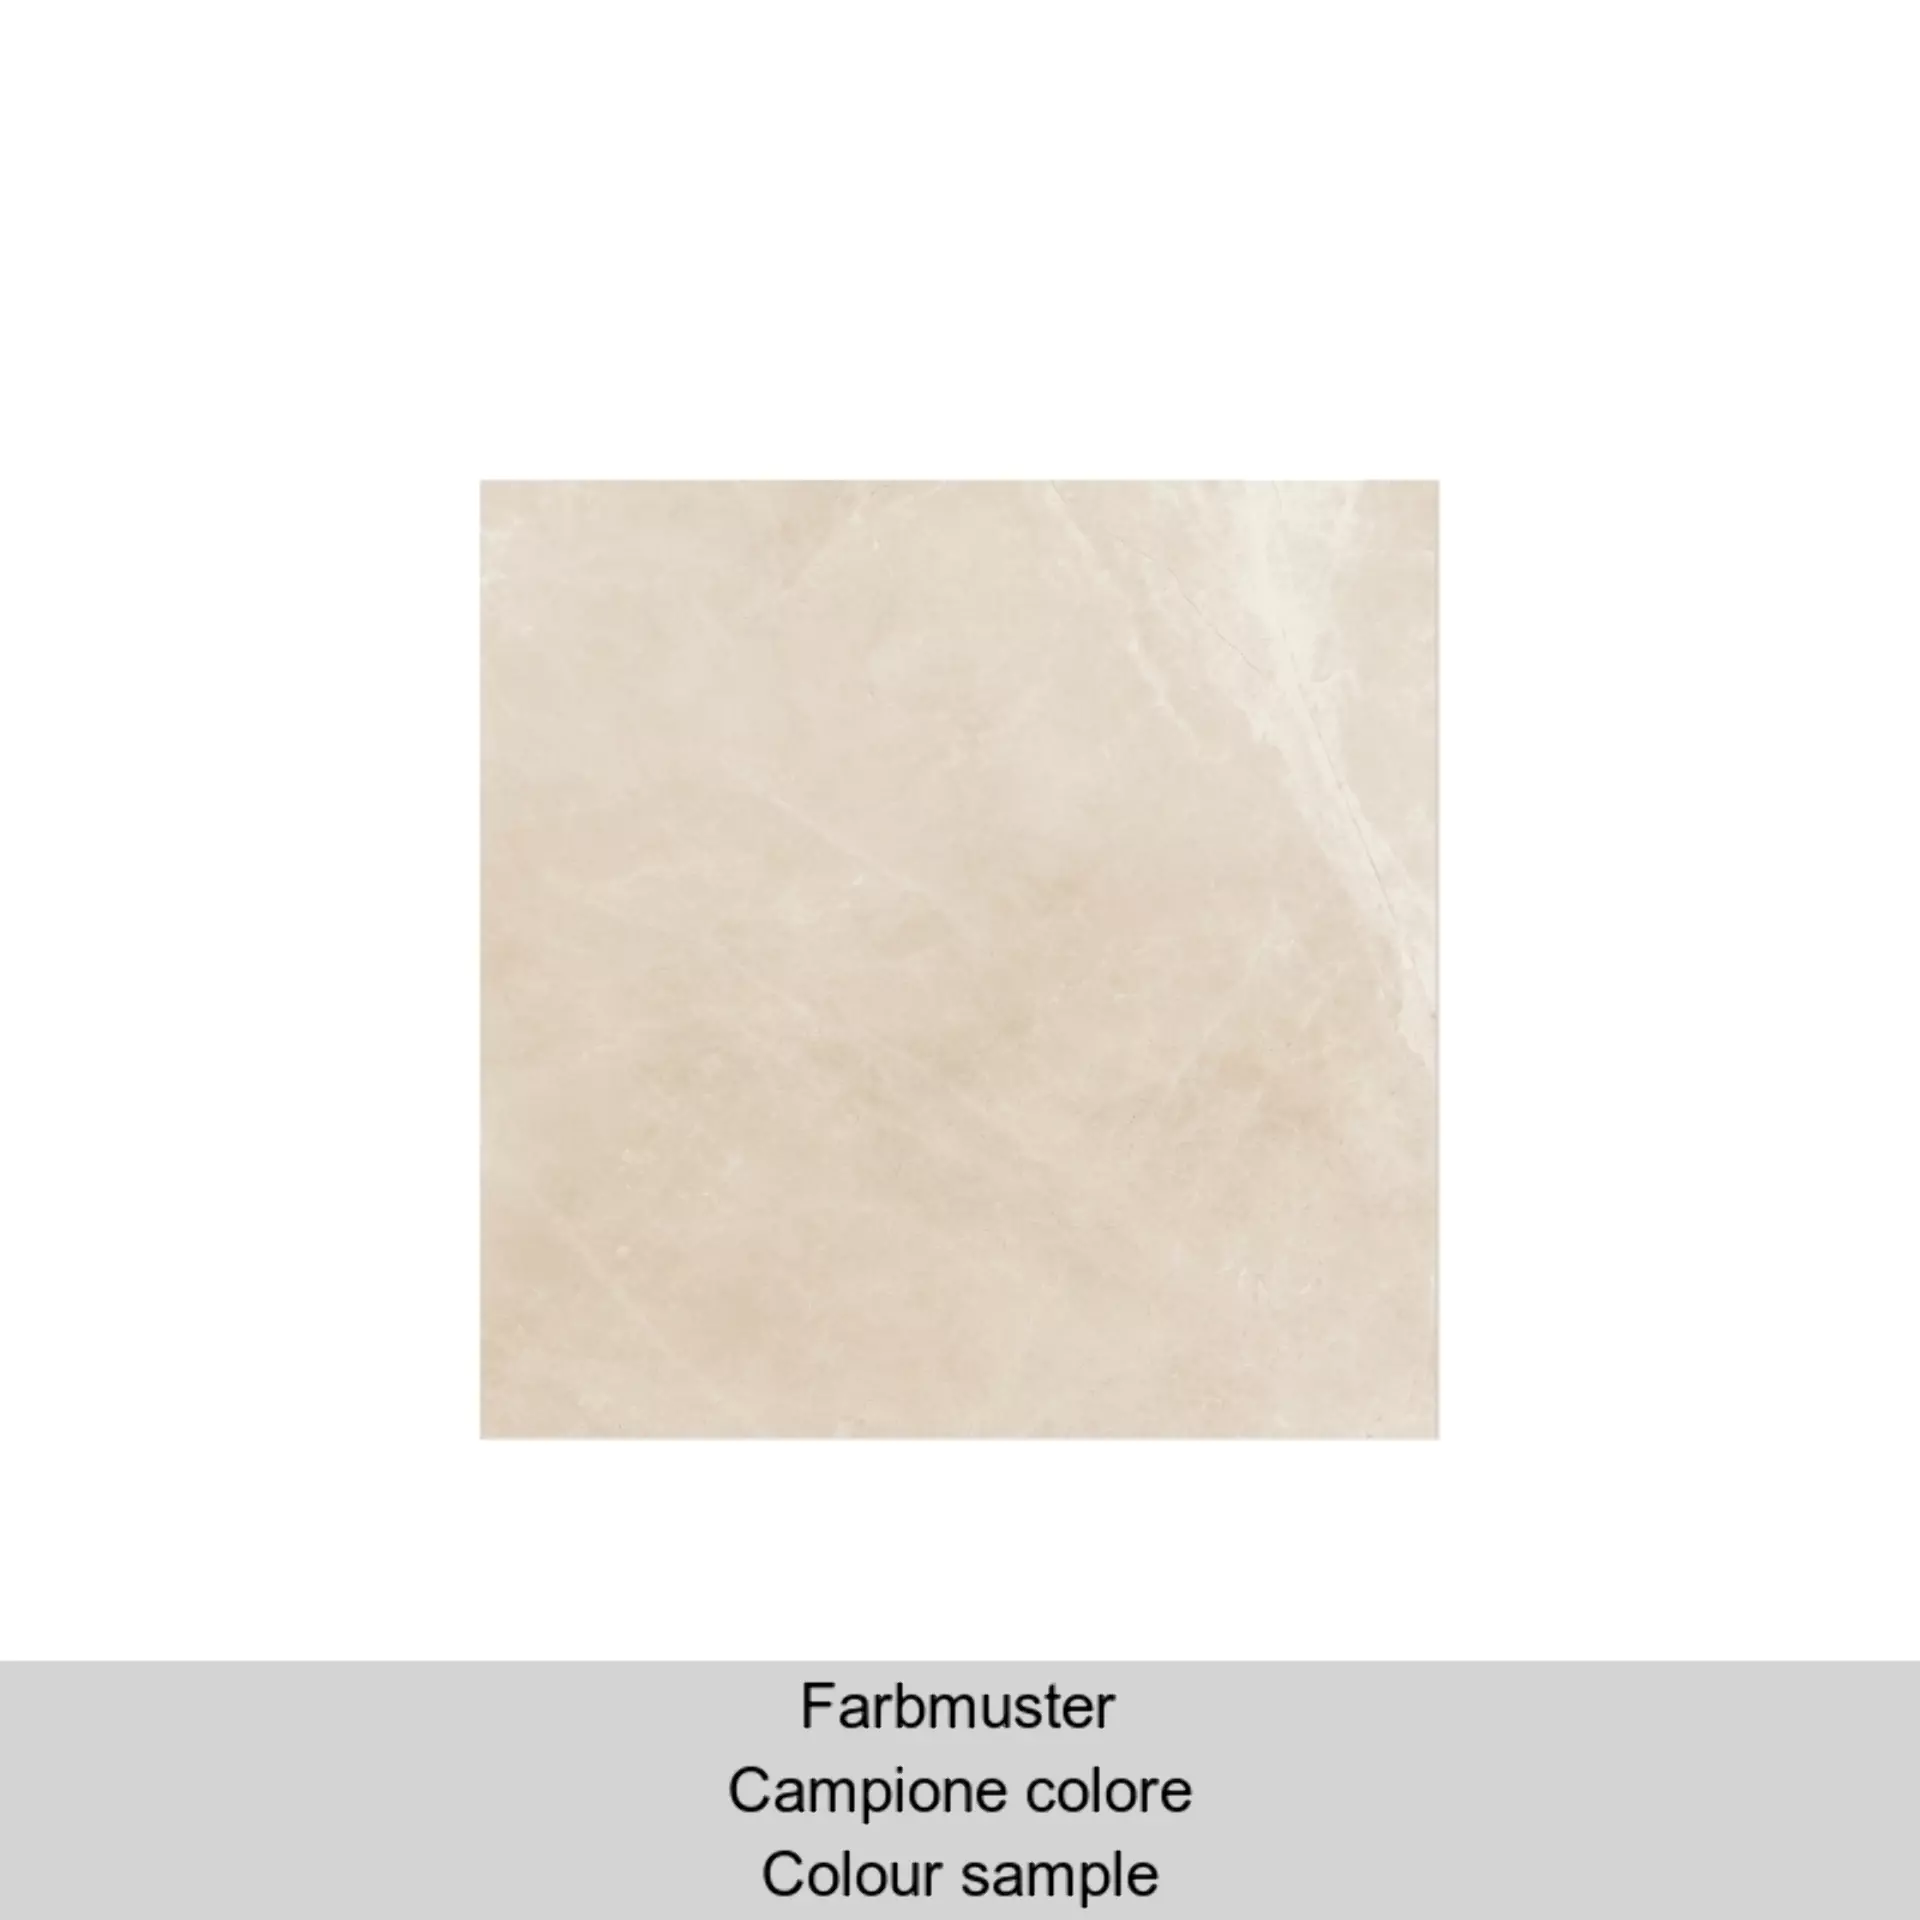 Supergres Purity Marbl Royal Beige Lux 12RX 120x120cm rectified 9mm